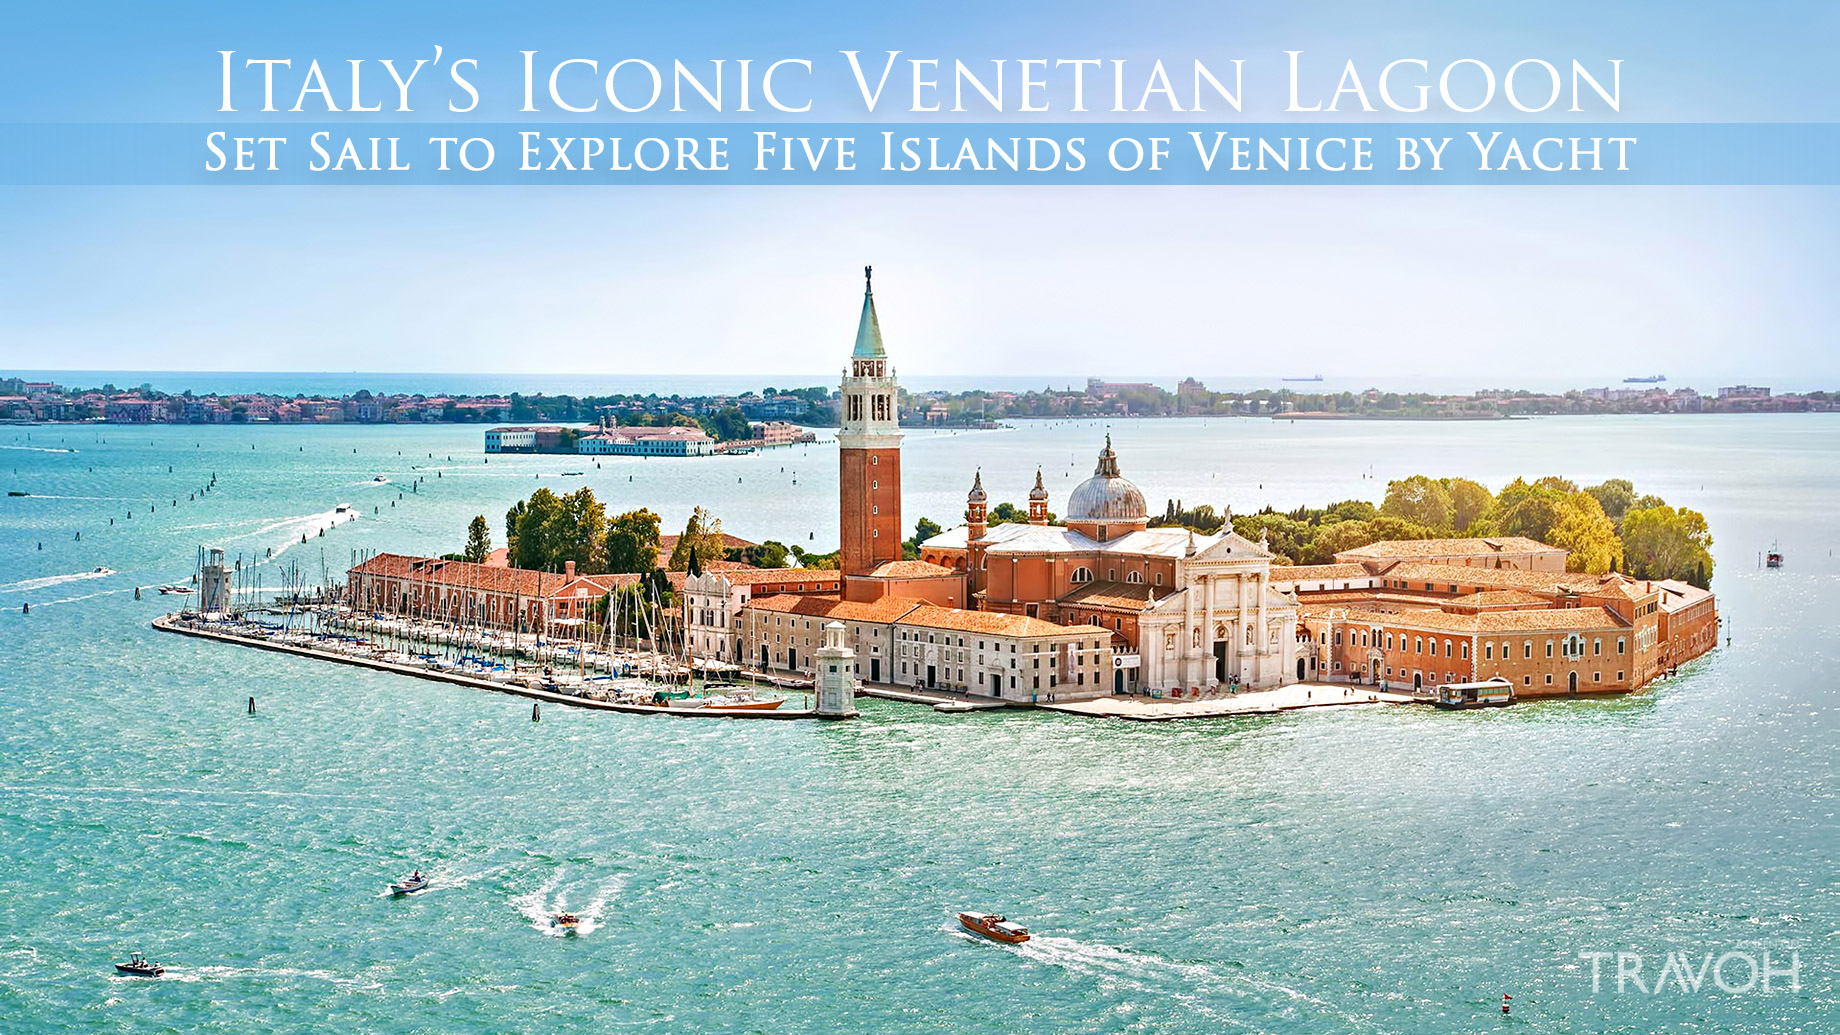 Italy's Iconic Venetian Lagoon - Set Sail to Explore Five Islands of Venice by Yacht